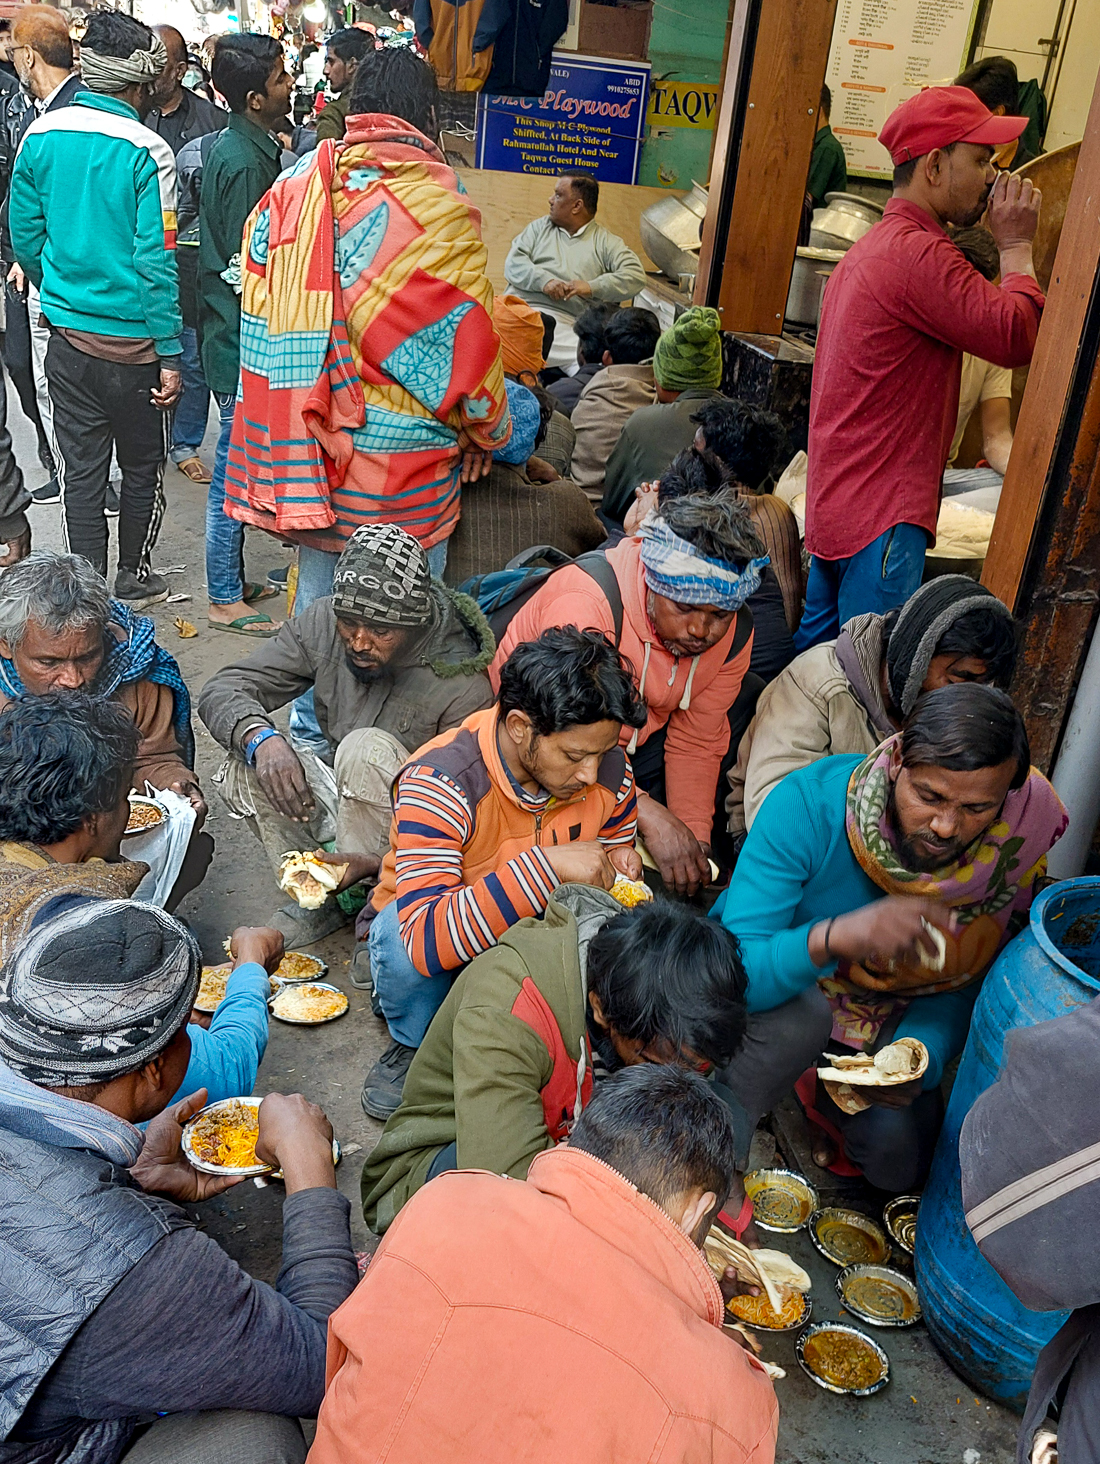 <span  class="uc_style_uc_tiles_grid_image_elementor_uc_items_attribute_title" style="color:#ffffff;">People waiting in front of restaurants in order to get something to eat for free</span>